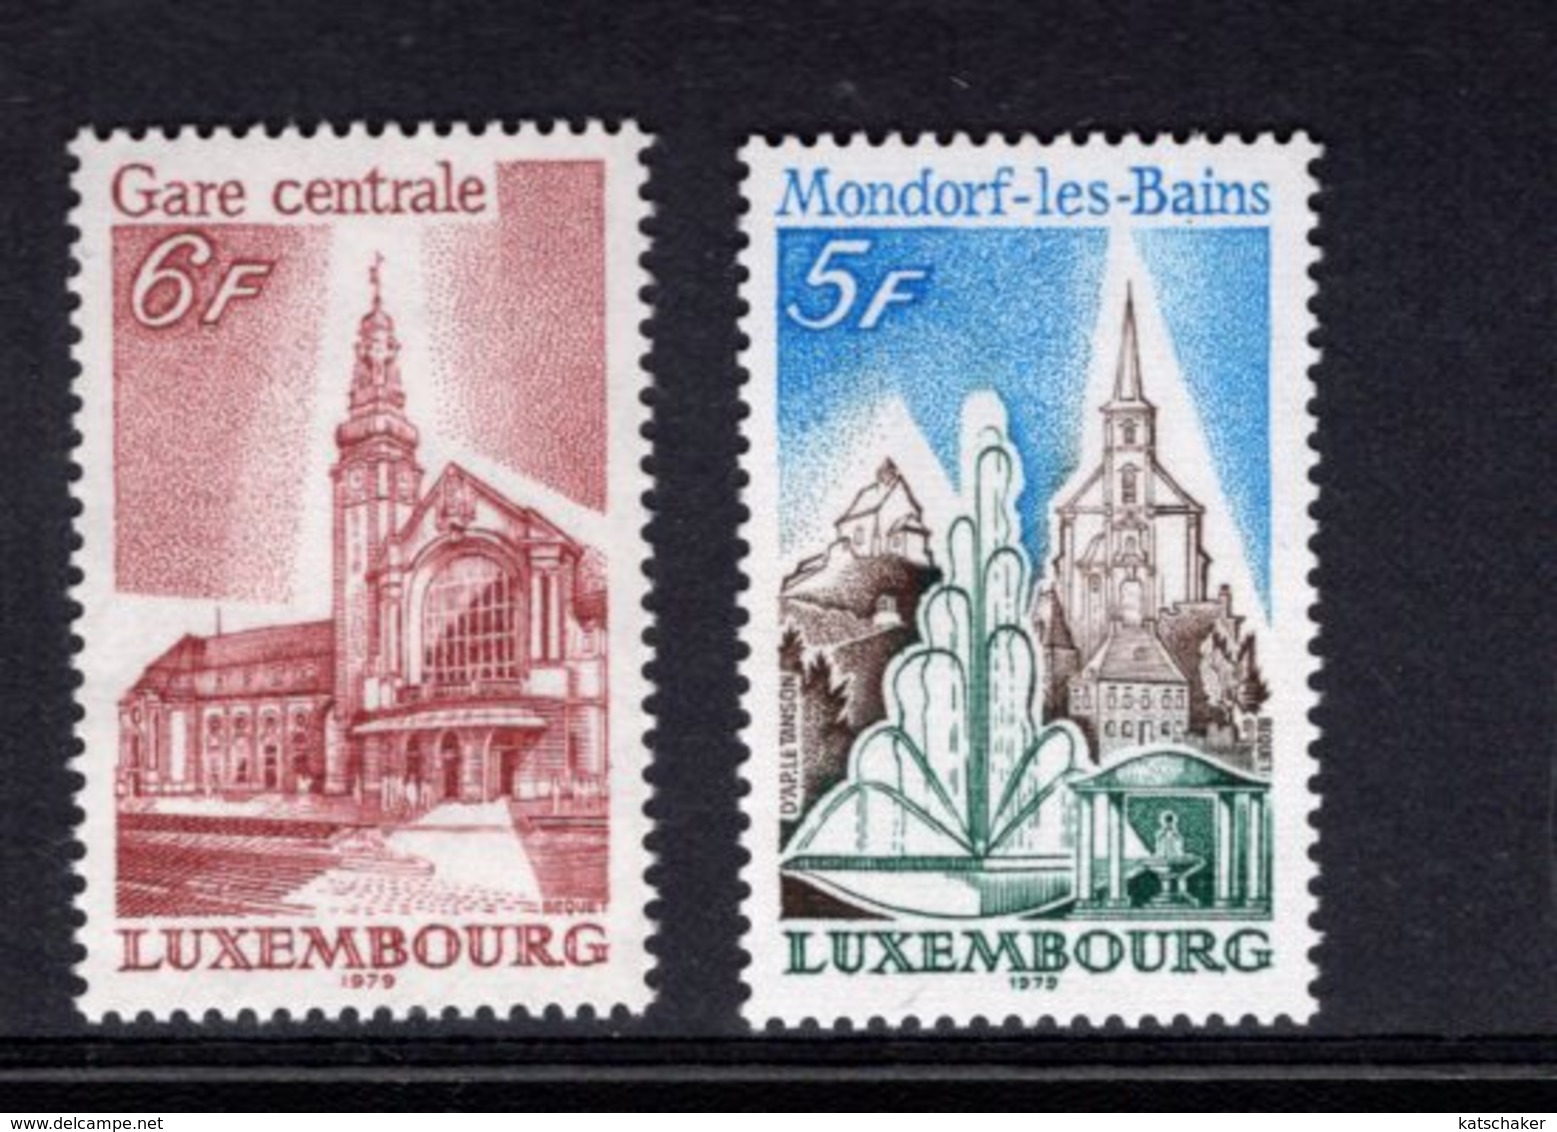 820224436 1979 SCOTT 622 623 POSTFRIS MINT  NEVER HINGED EINWANDFREI (XX)  LUXEMBOURG CENTRAL STATION - ST MICHAELS CHUR - Unused Stamps